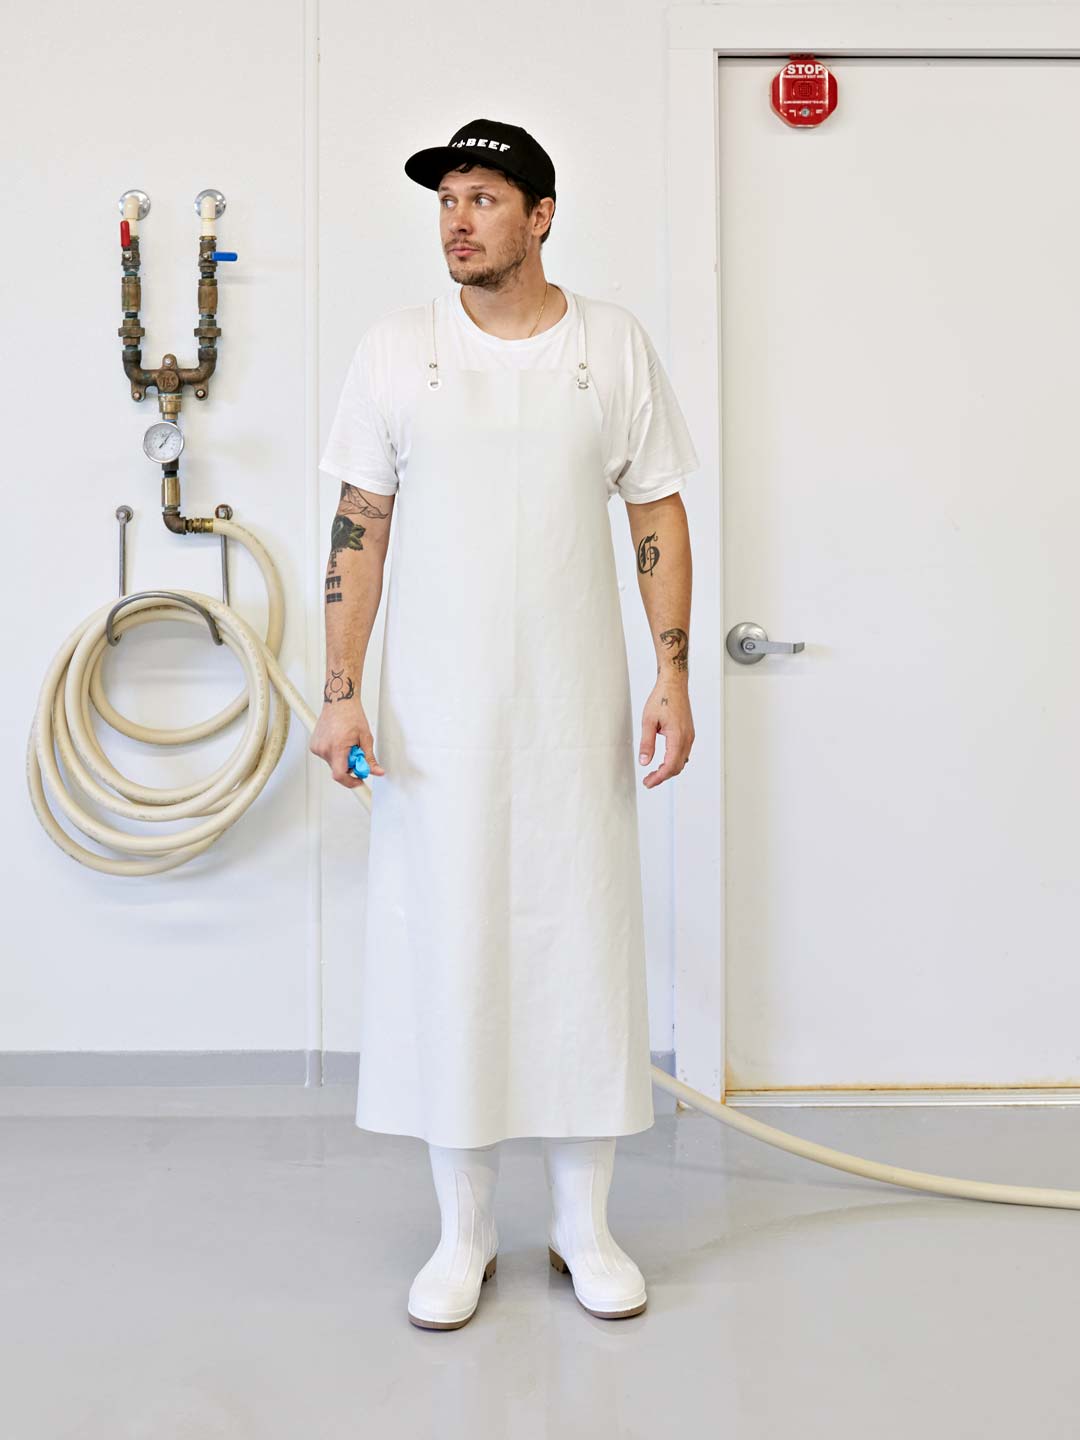  Male cheesemaker in dairy whites,  Atlanta, photography by Nick Burchell